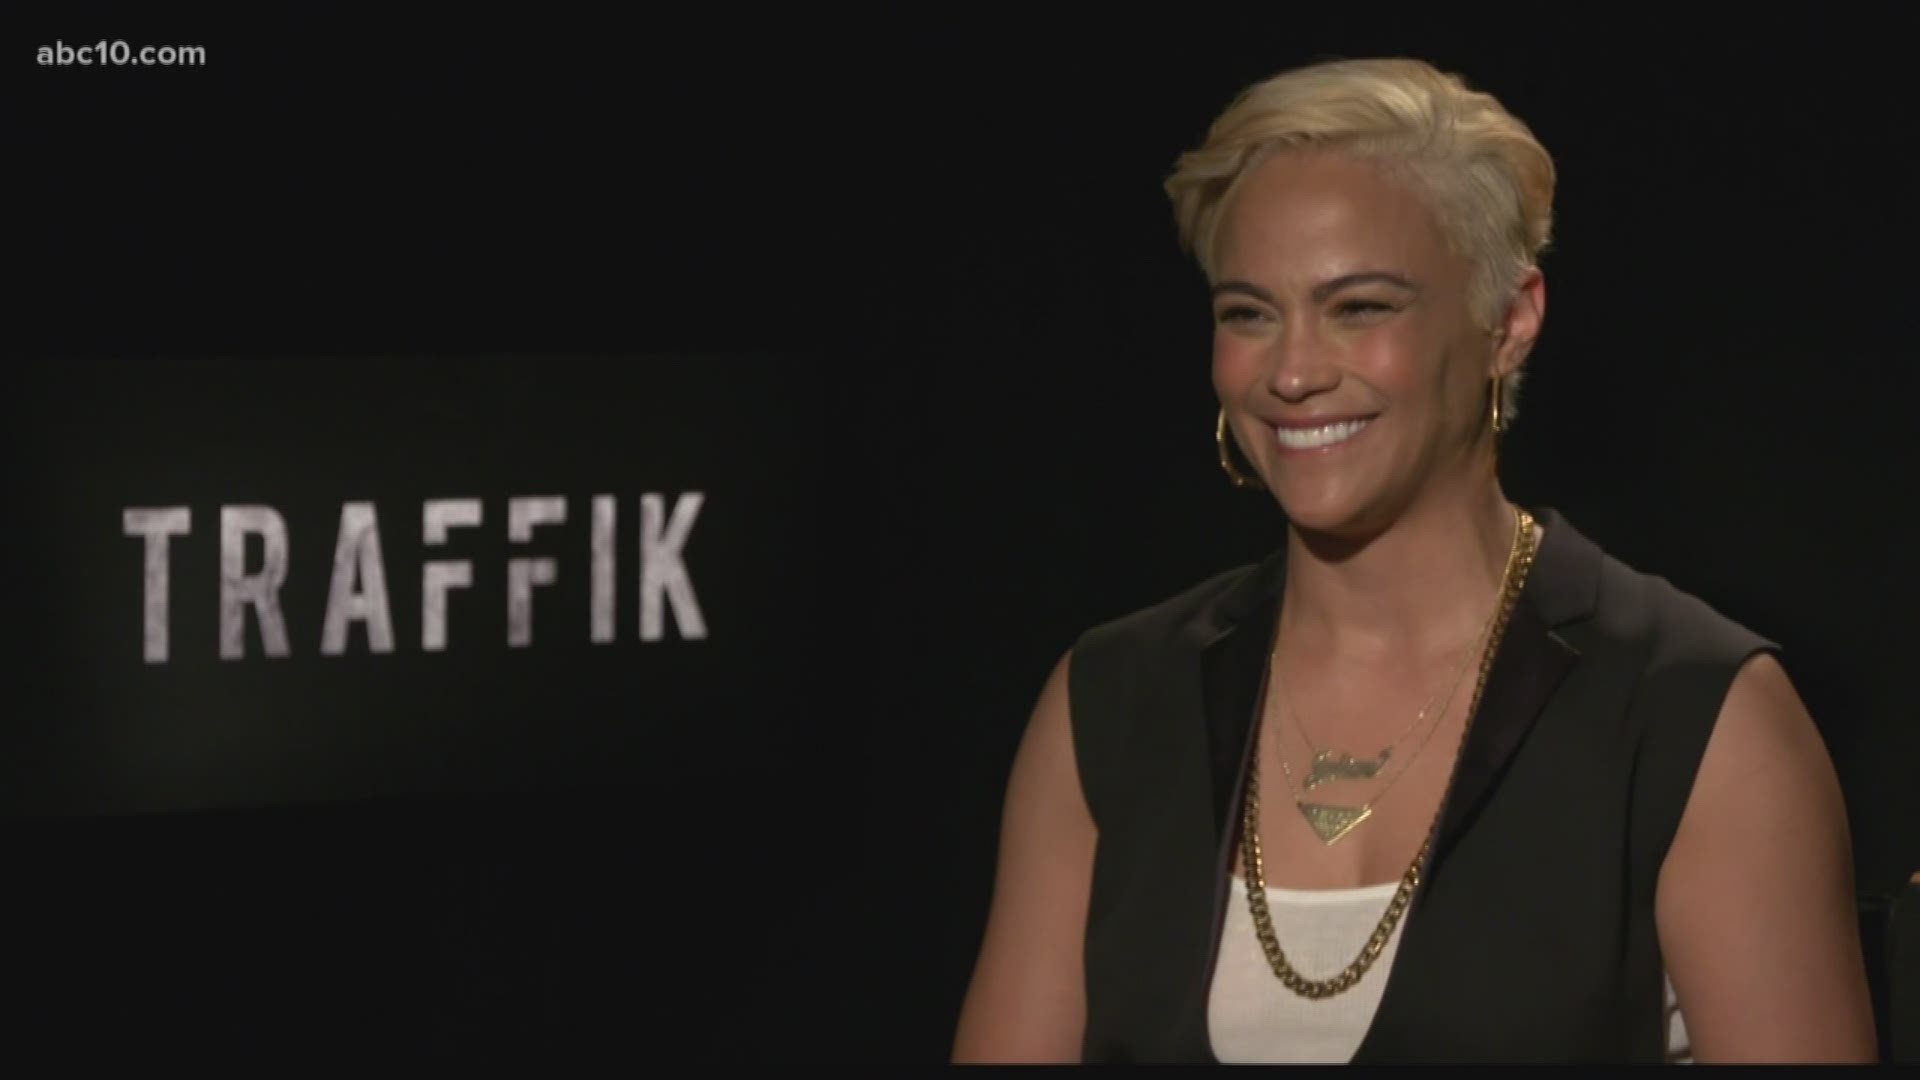 Mark S. Allen sat down with Paula Patton, the star of the new thriller "Traffik" which was shot mostly in Sacramento.